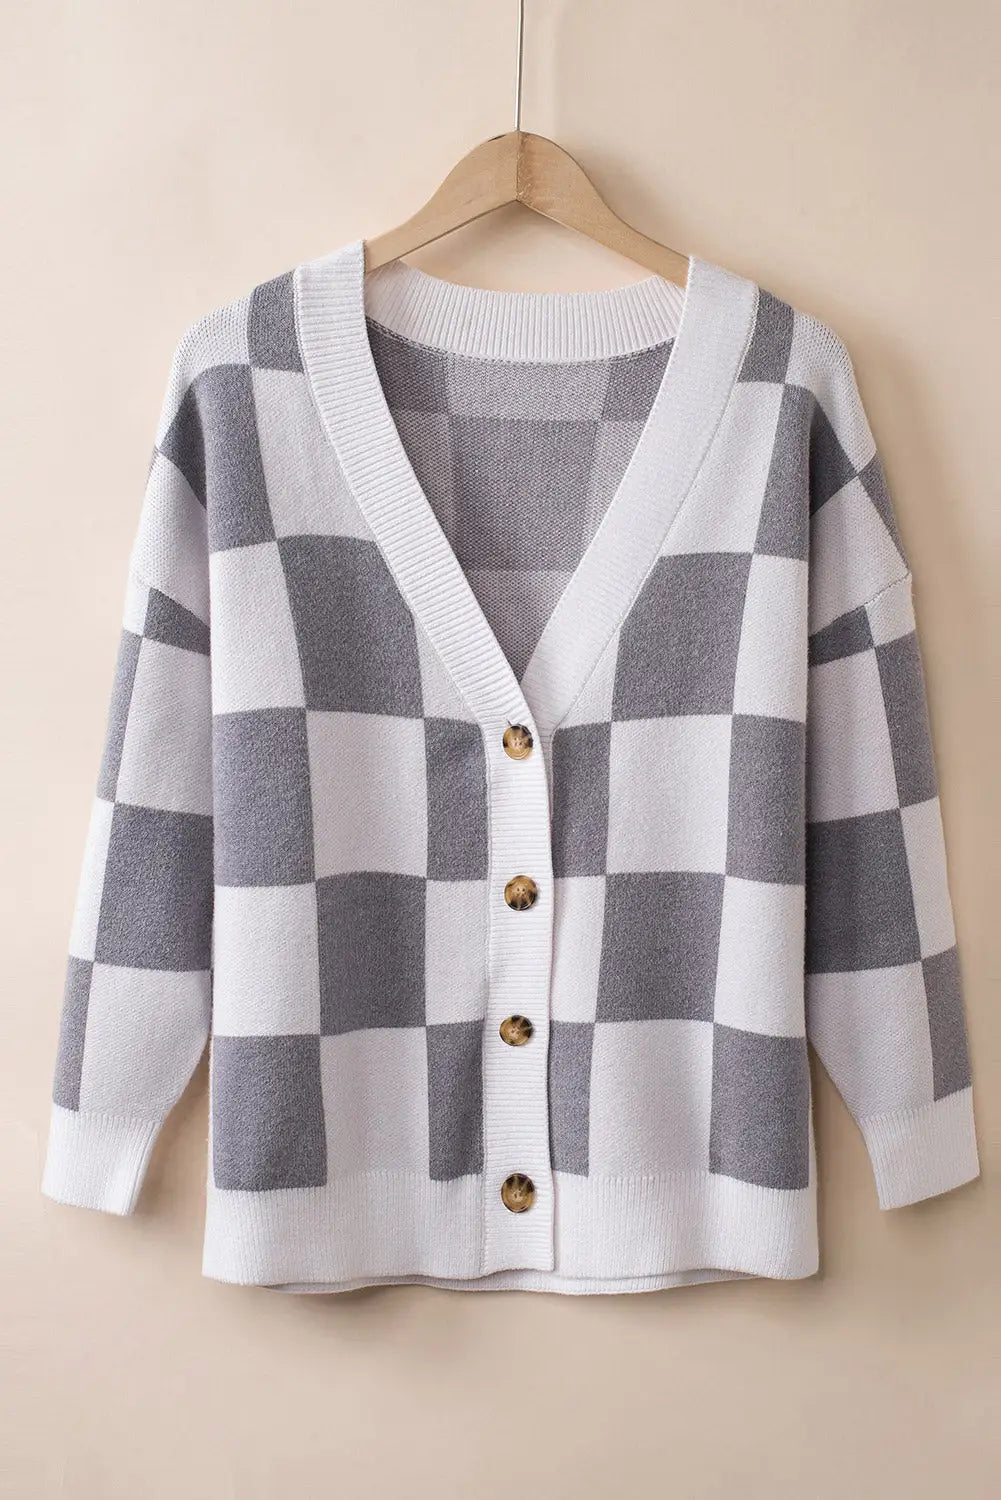 Brown contrast checkered print button up sweater cardigan - tops